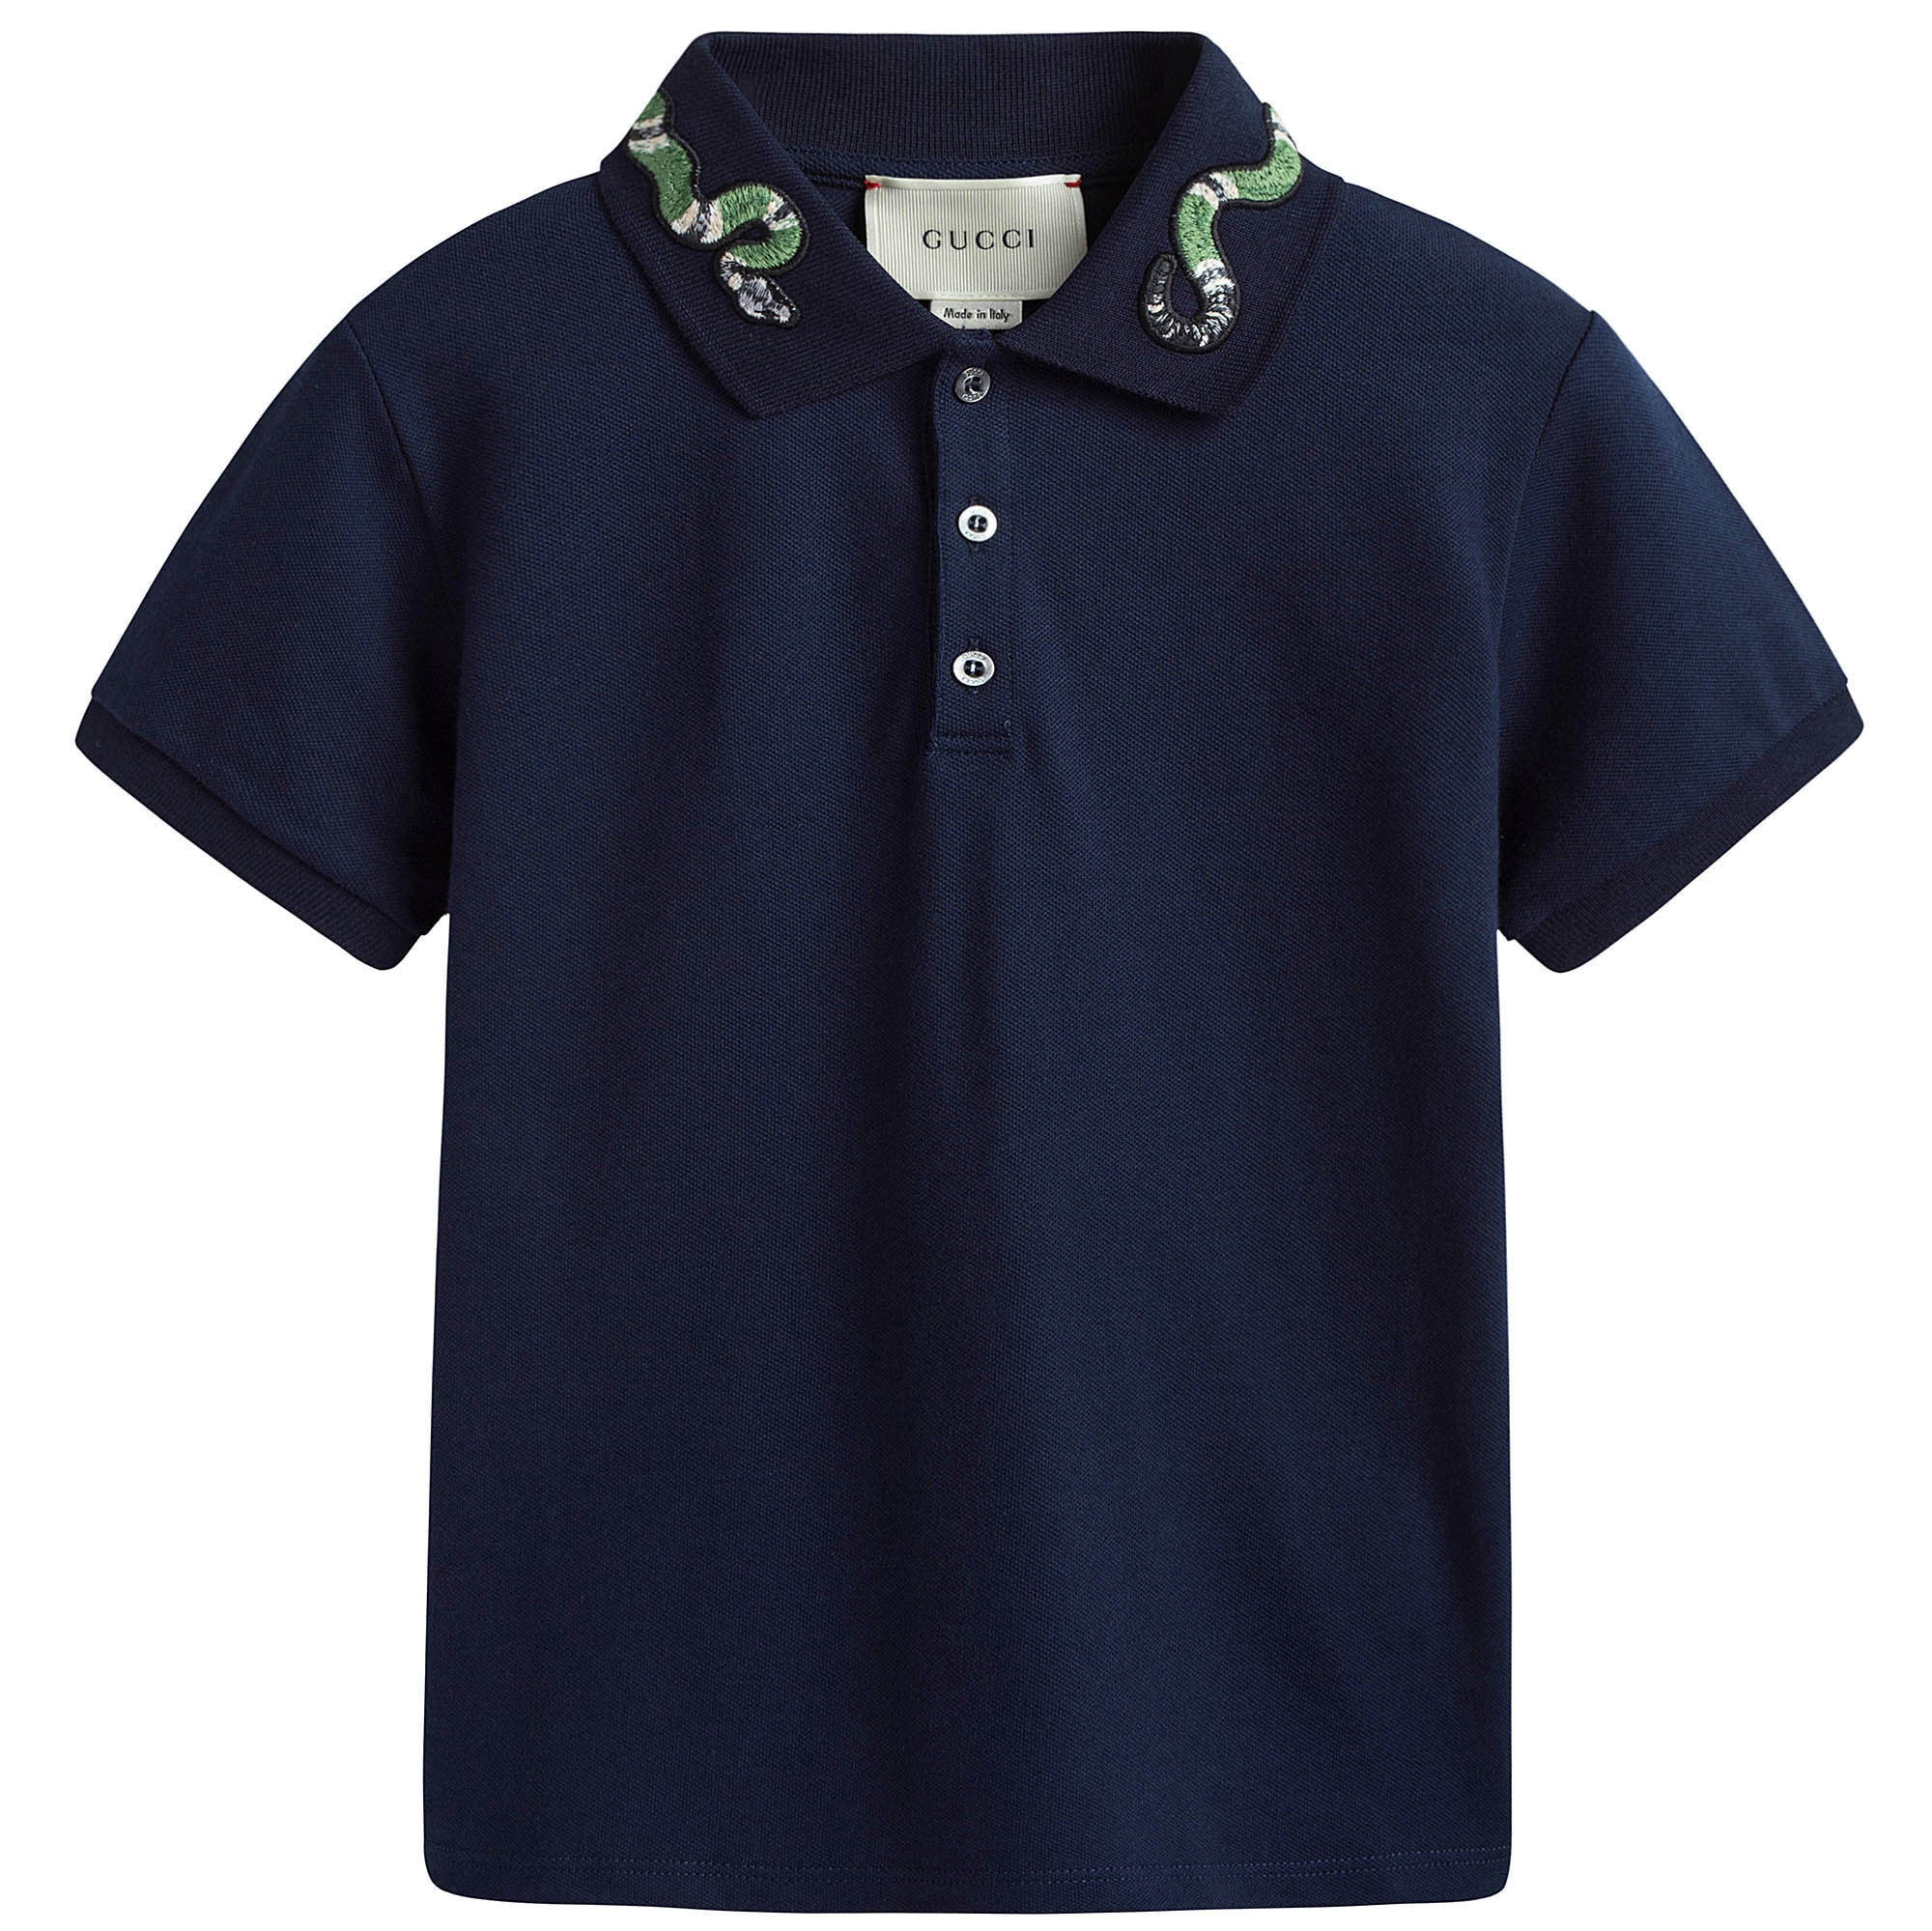 Boys Navy Blue Embroidered Snake Cuffs Polo Shirt